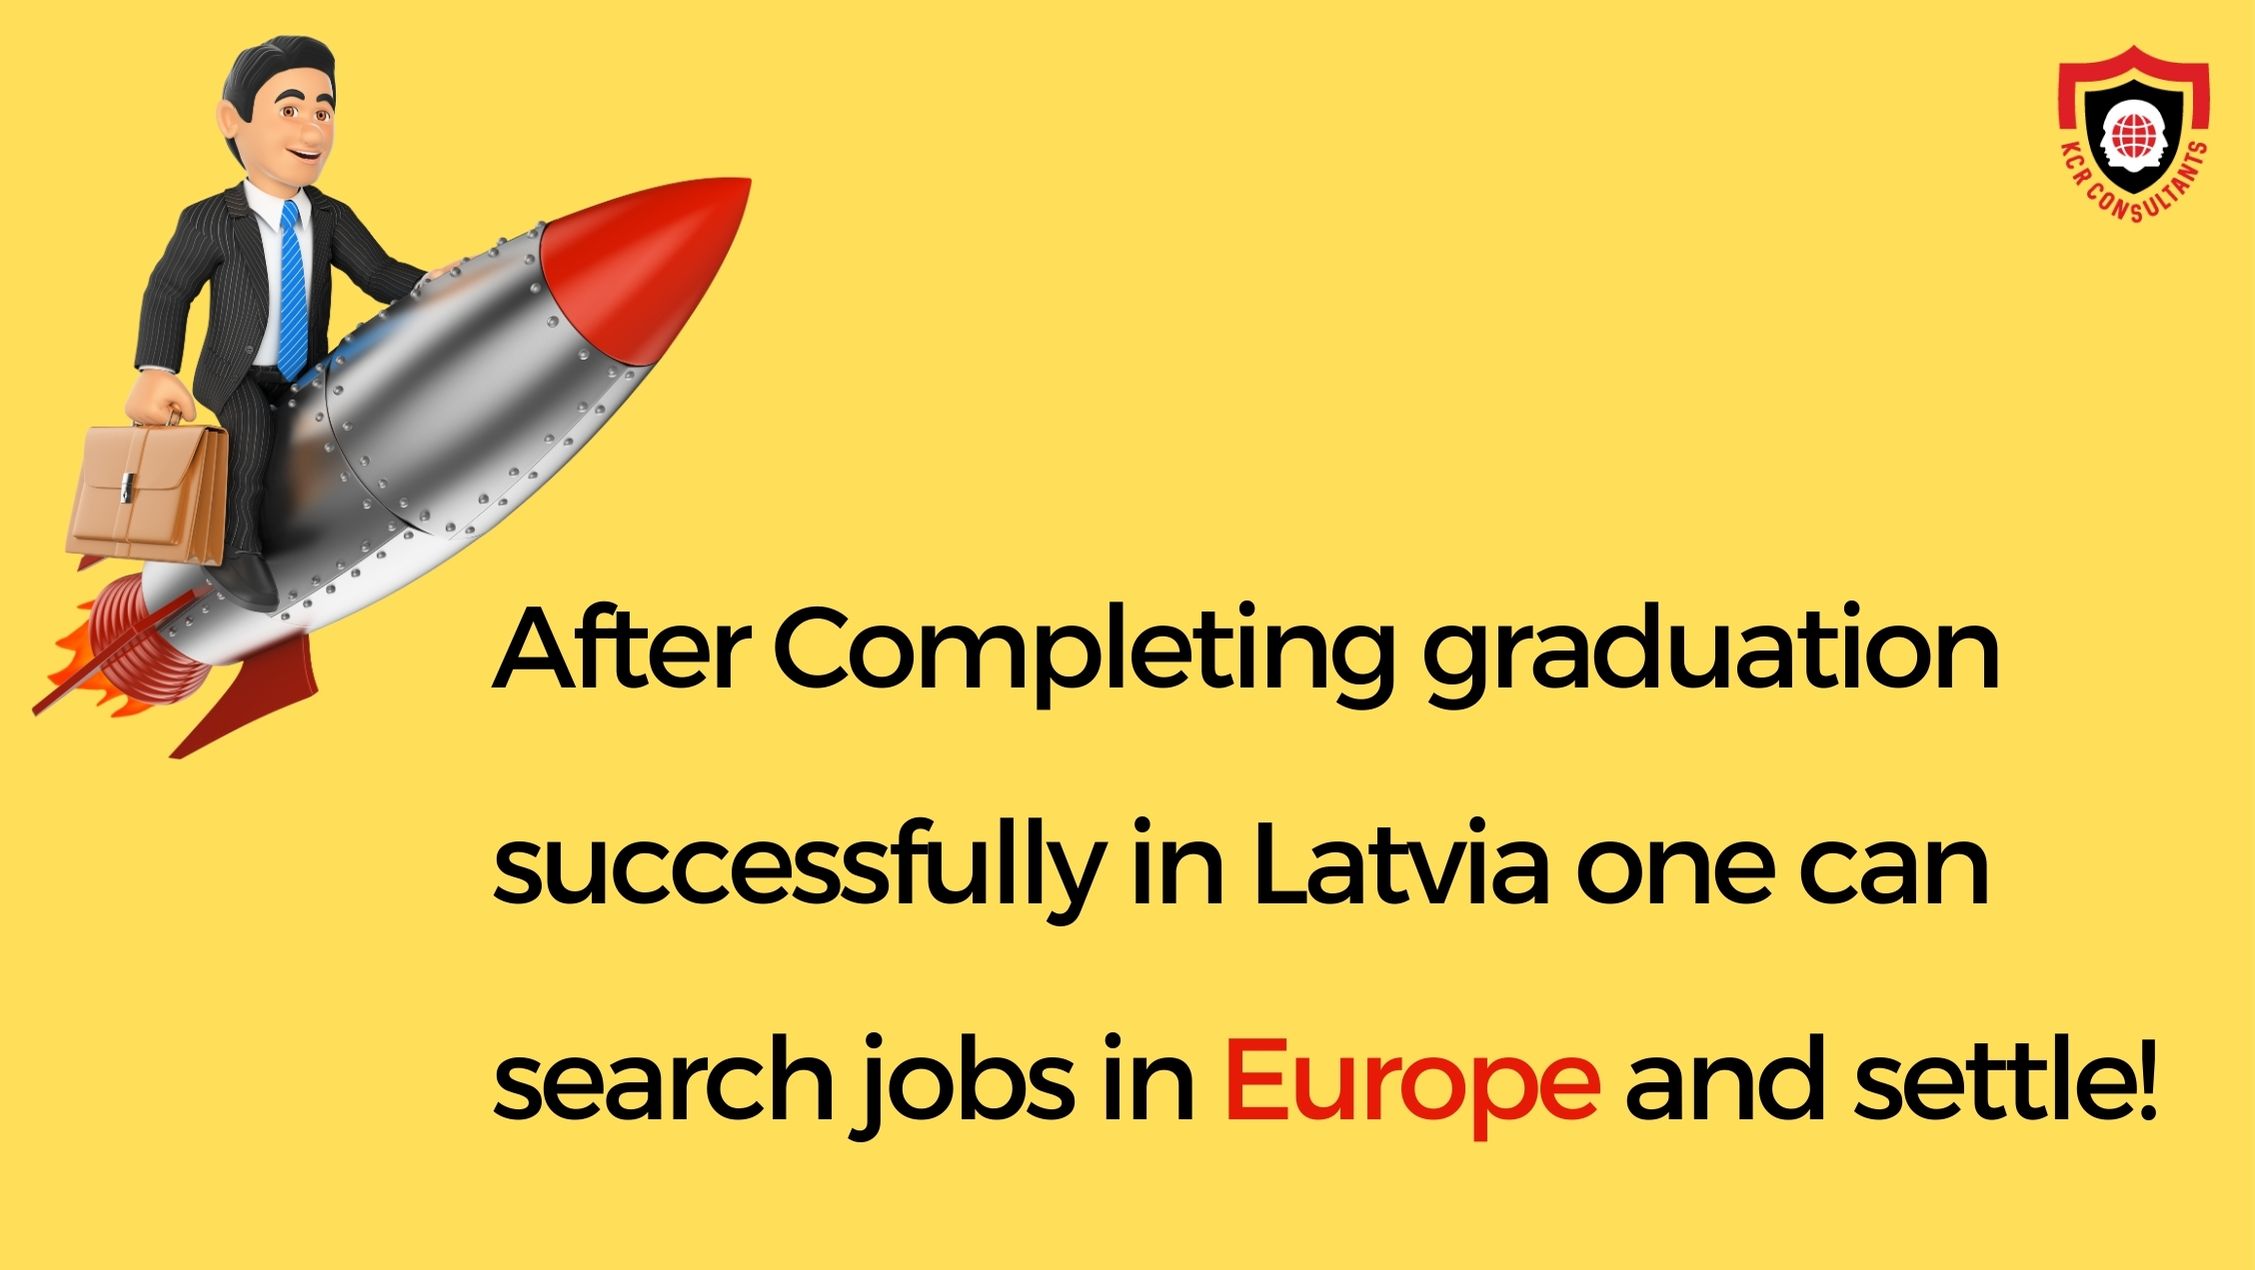 Study in Latvia and settle in Europe